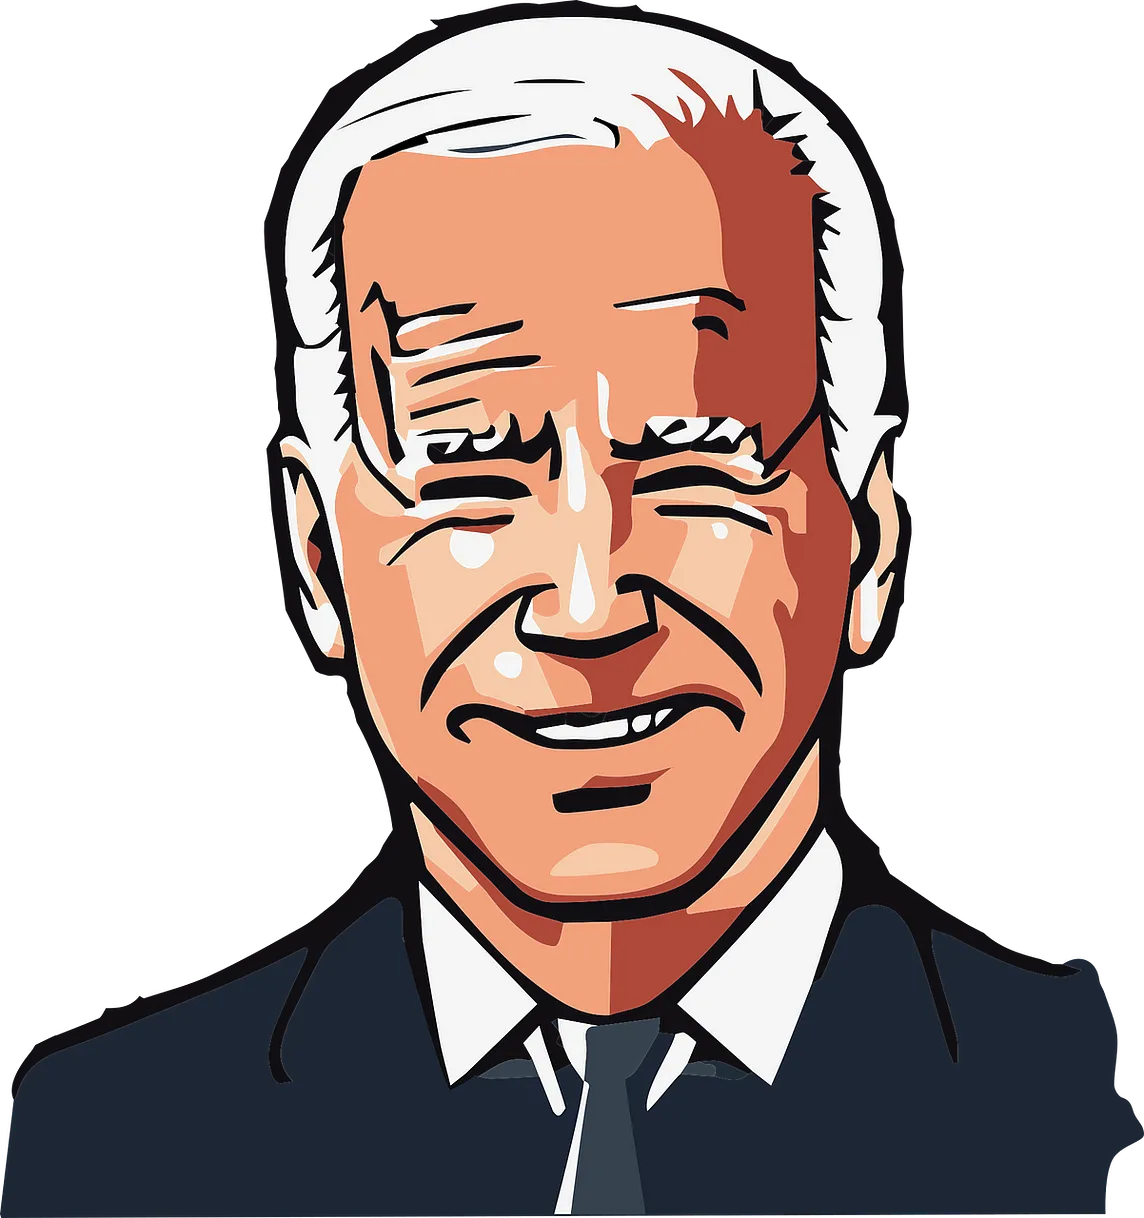 Hoping To Connect With Younger Voters, Biden Promises To Do Upcoming Debate In Fluent Emoji